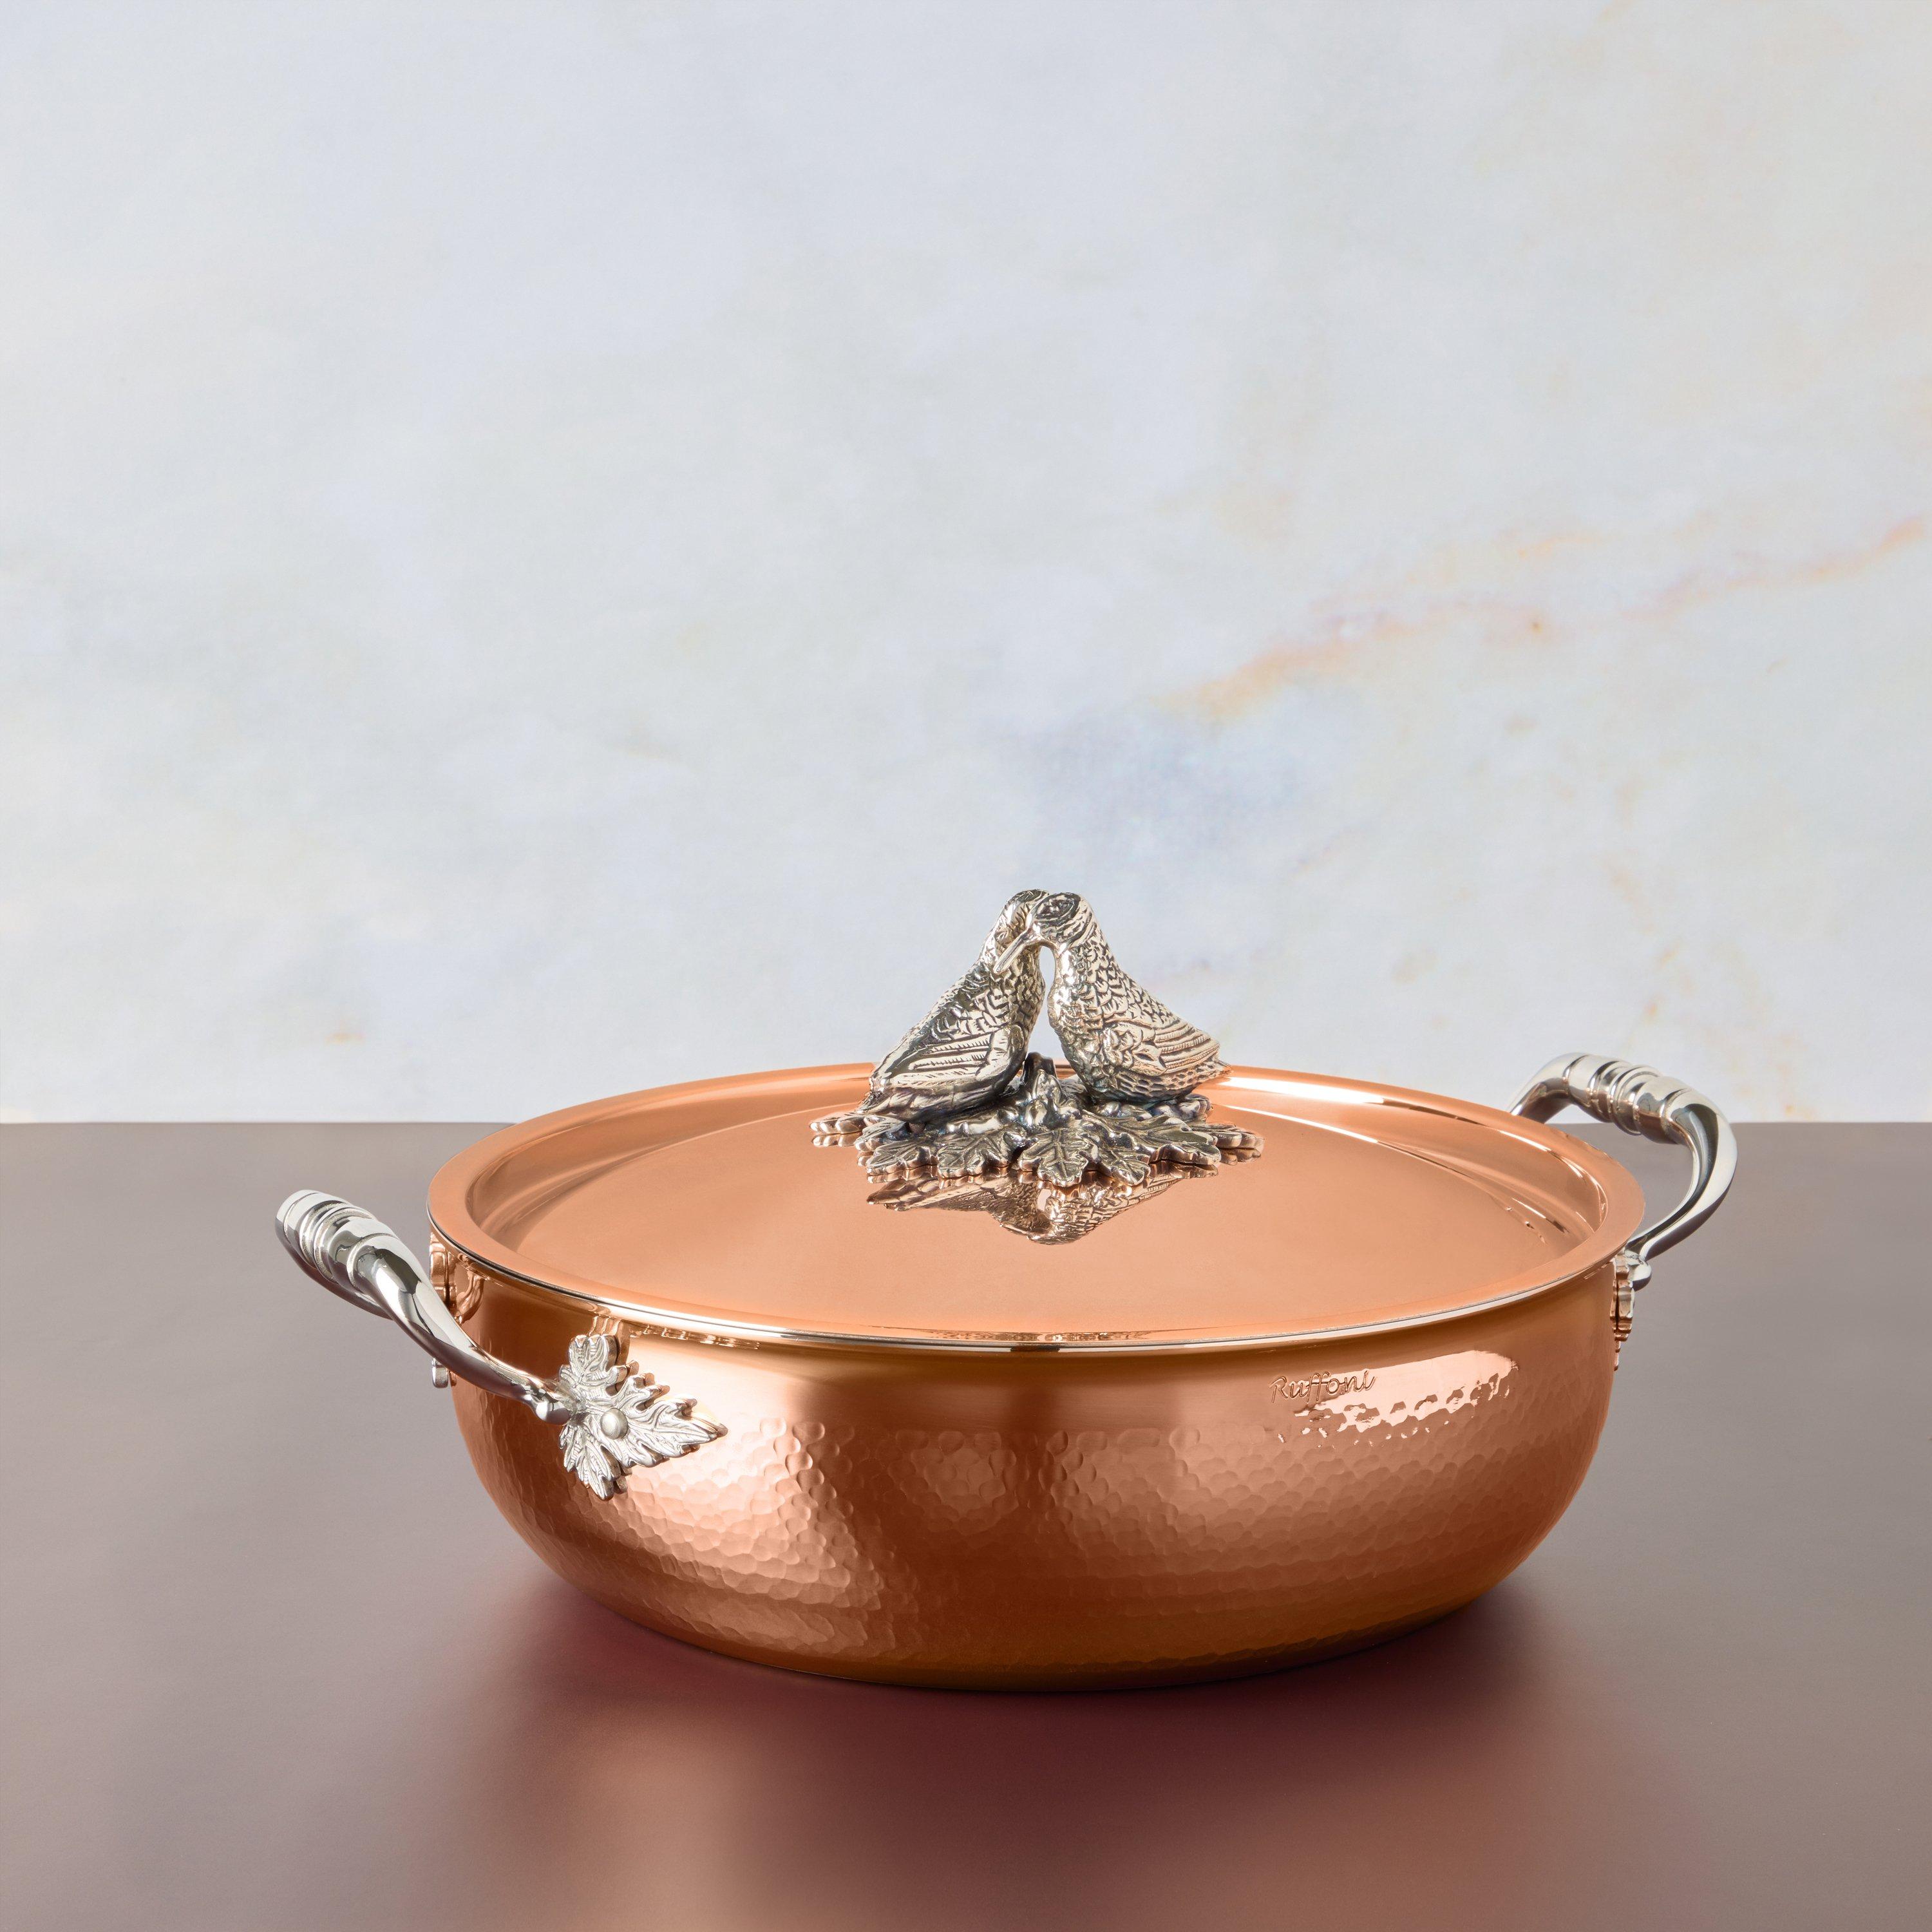 COPPER SAUCE PAN, Hand Hammered Solid Red Copper Saucepan, Copper